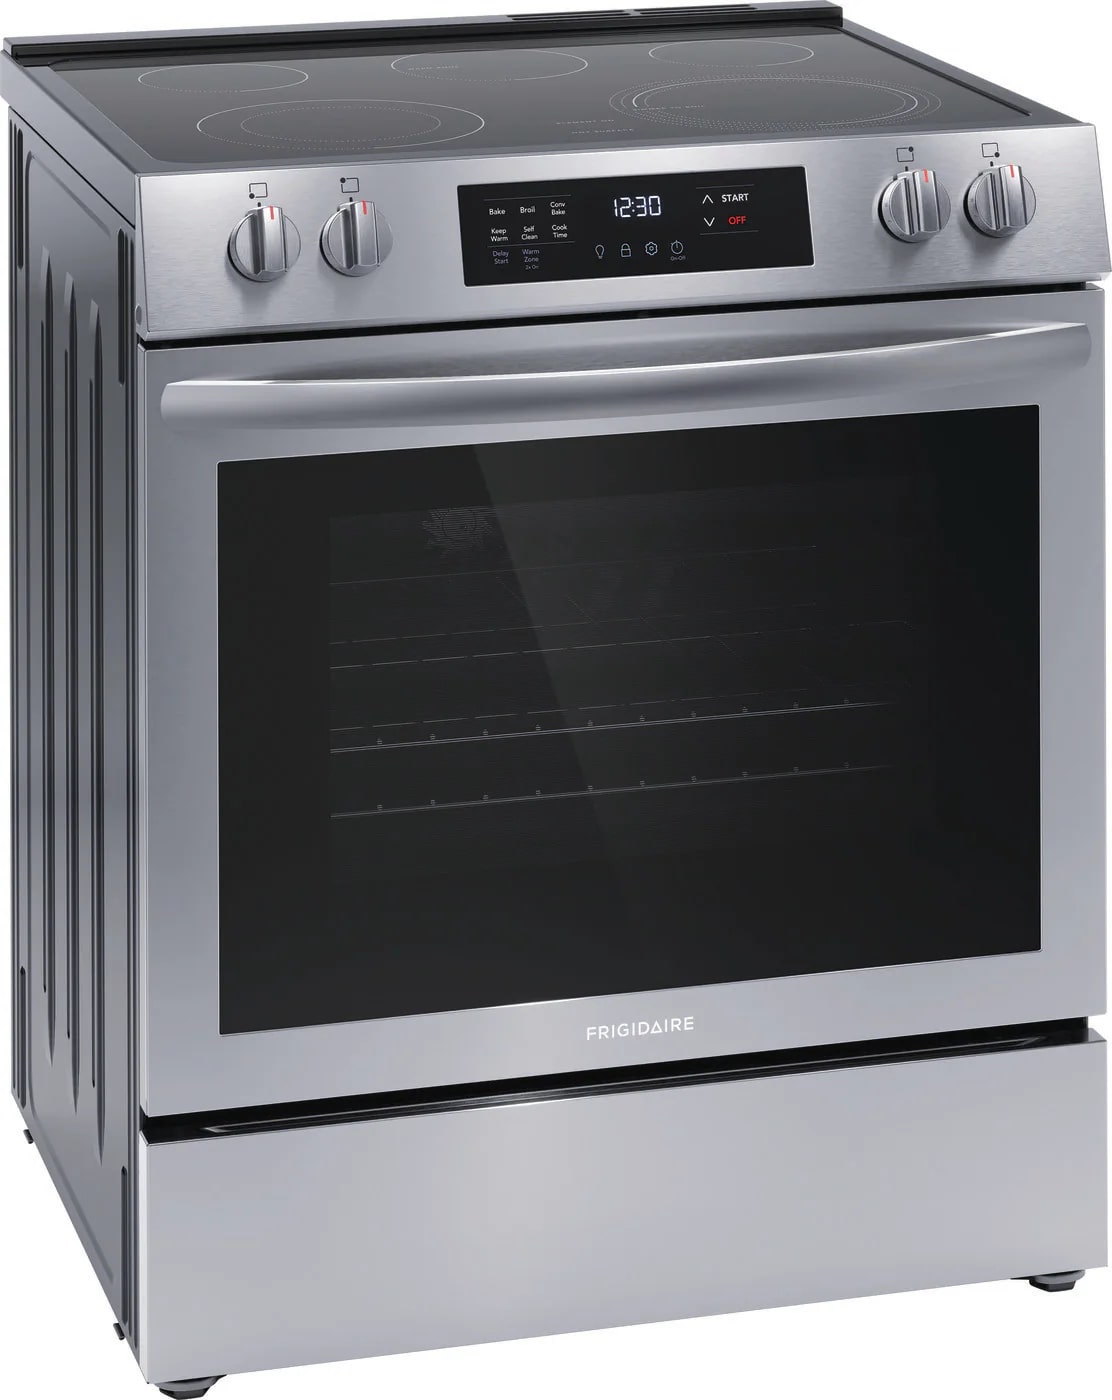 Frigidaire - 5.3 cu. ft  Electric Range in Stainless - FCFE308CAS